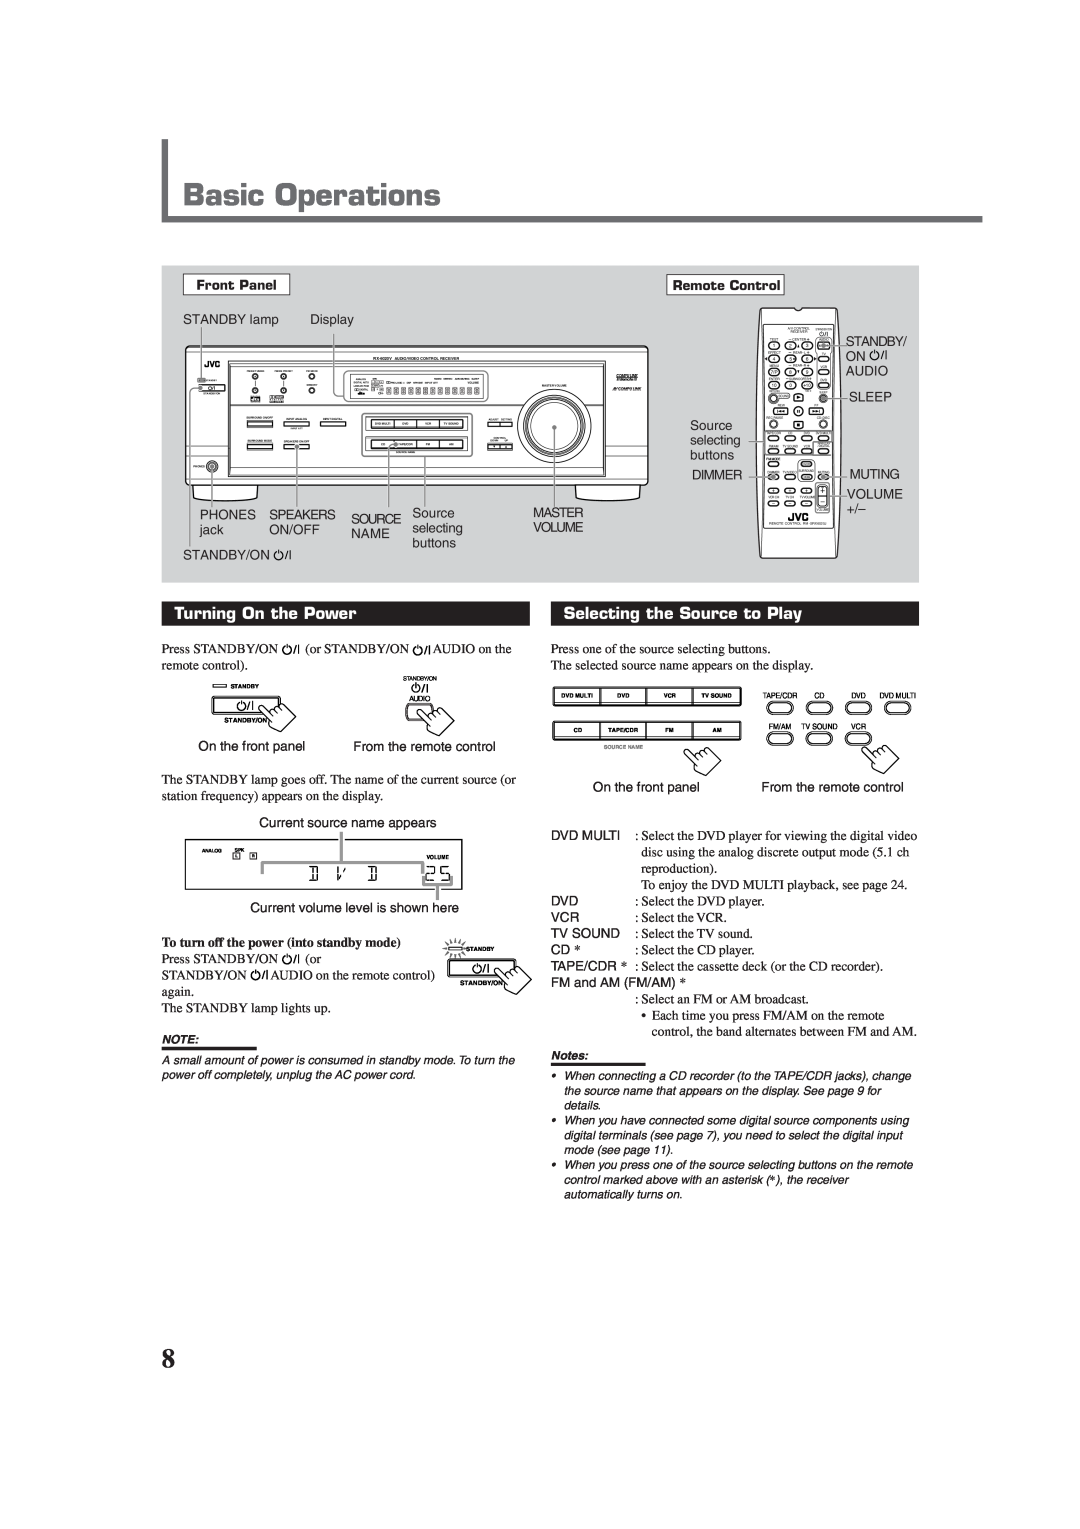 JVC RX-6020VBK manual Basic Operations, Turning On the Power, Selecting the Source to Play, Audio 